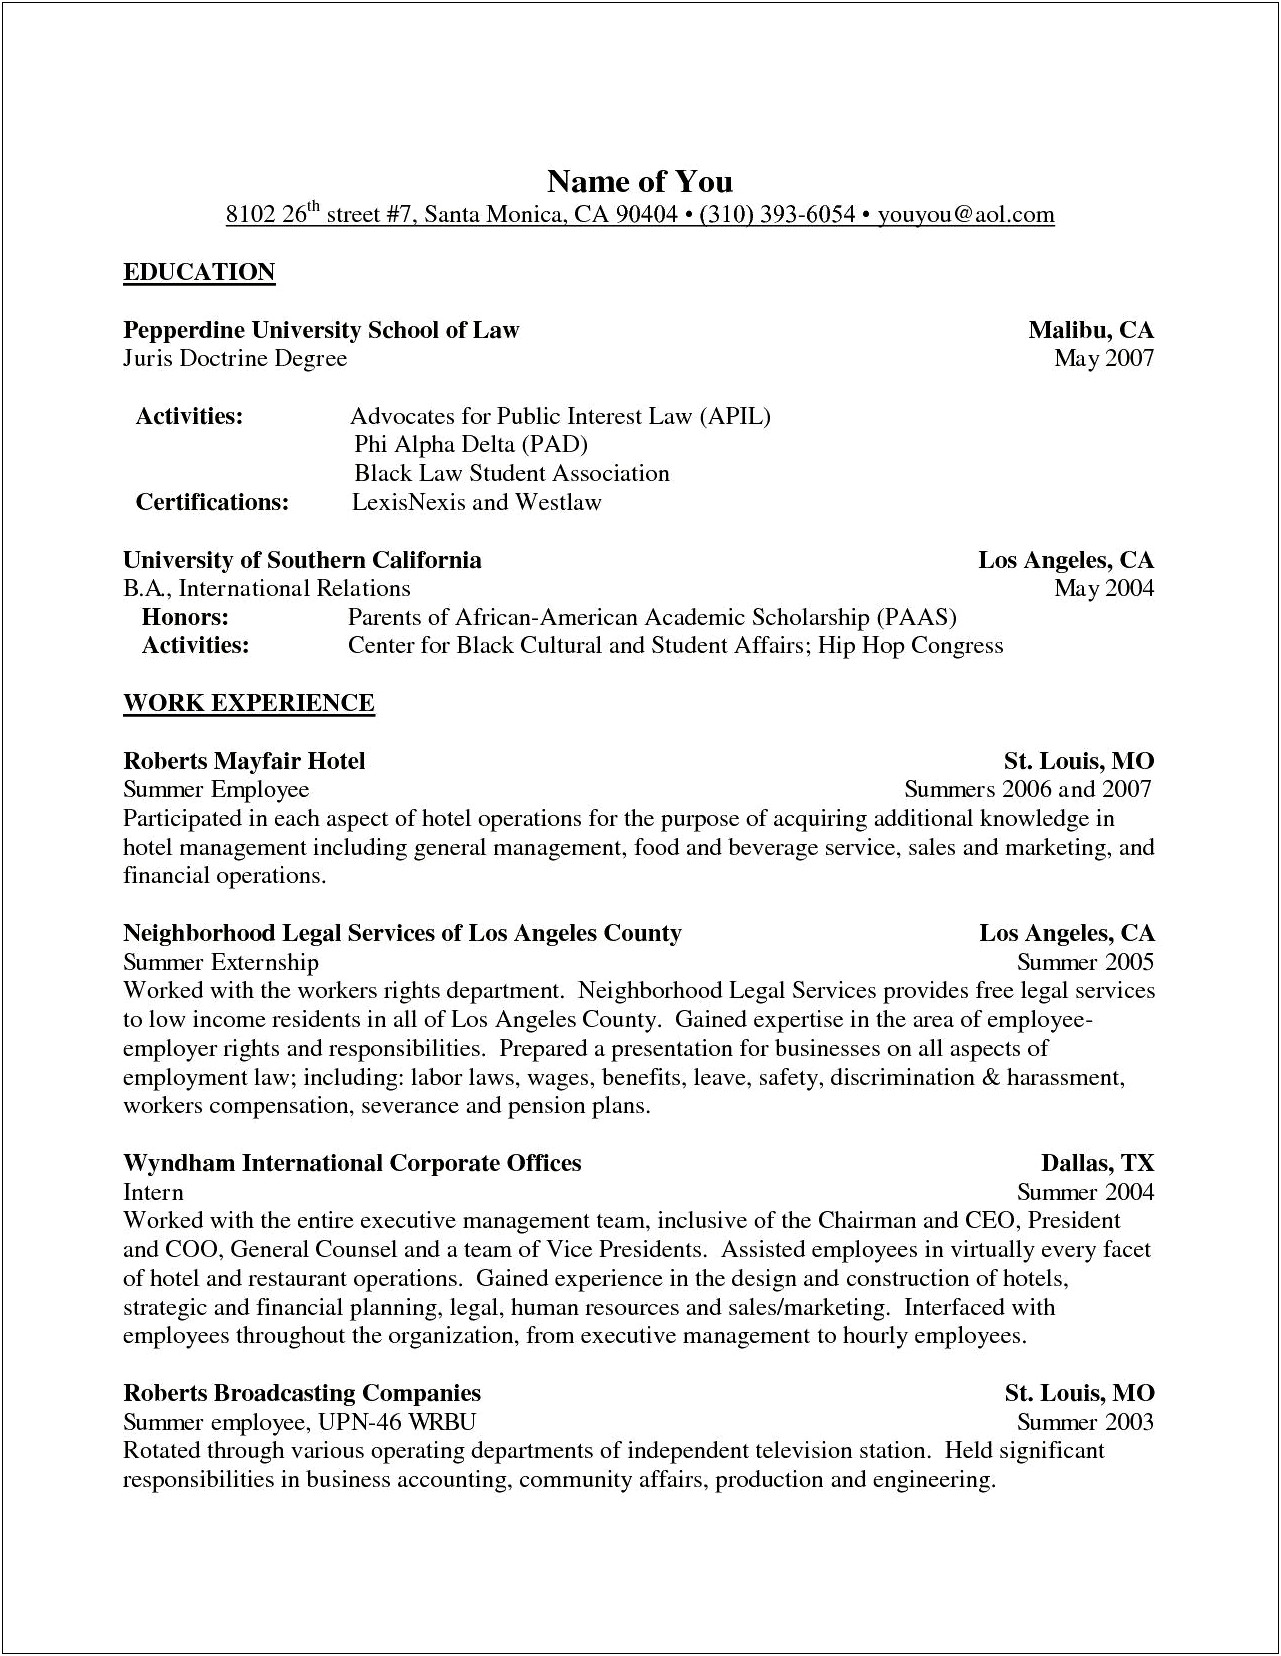 Where To Put Student Organizations On Legal Resume